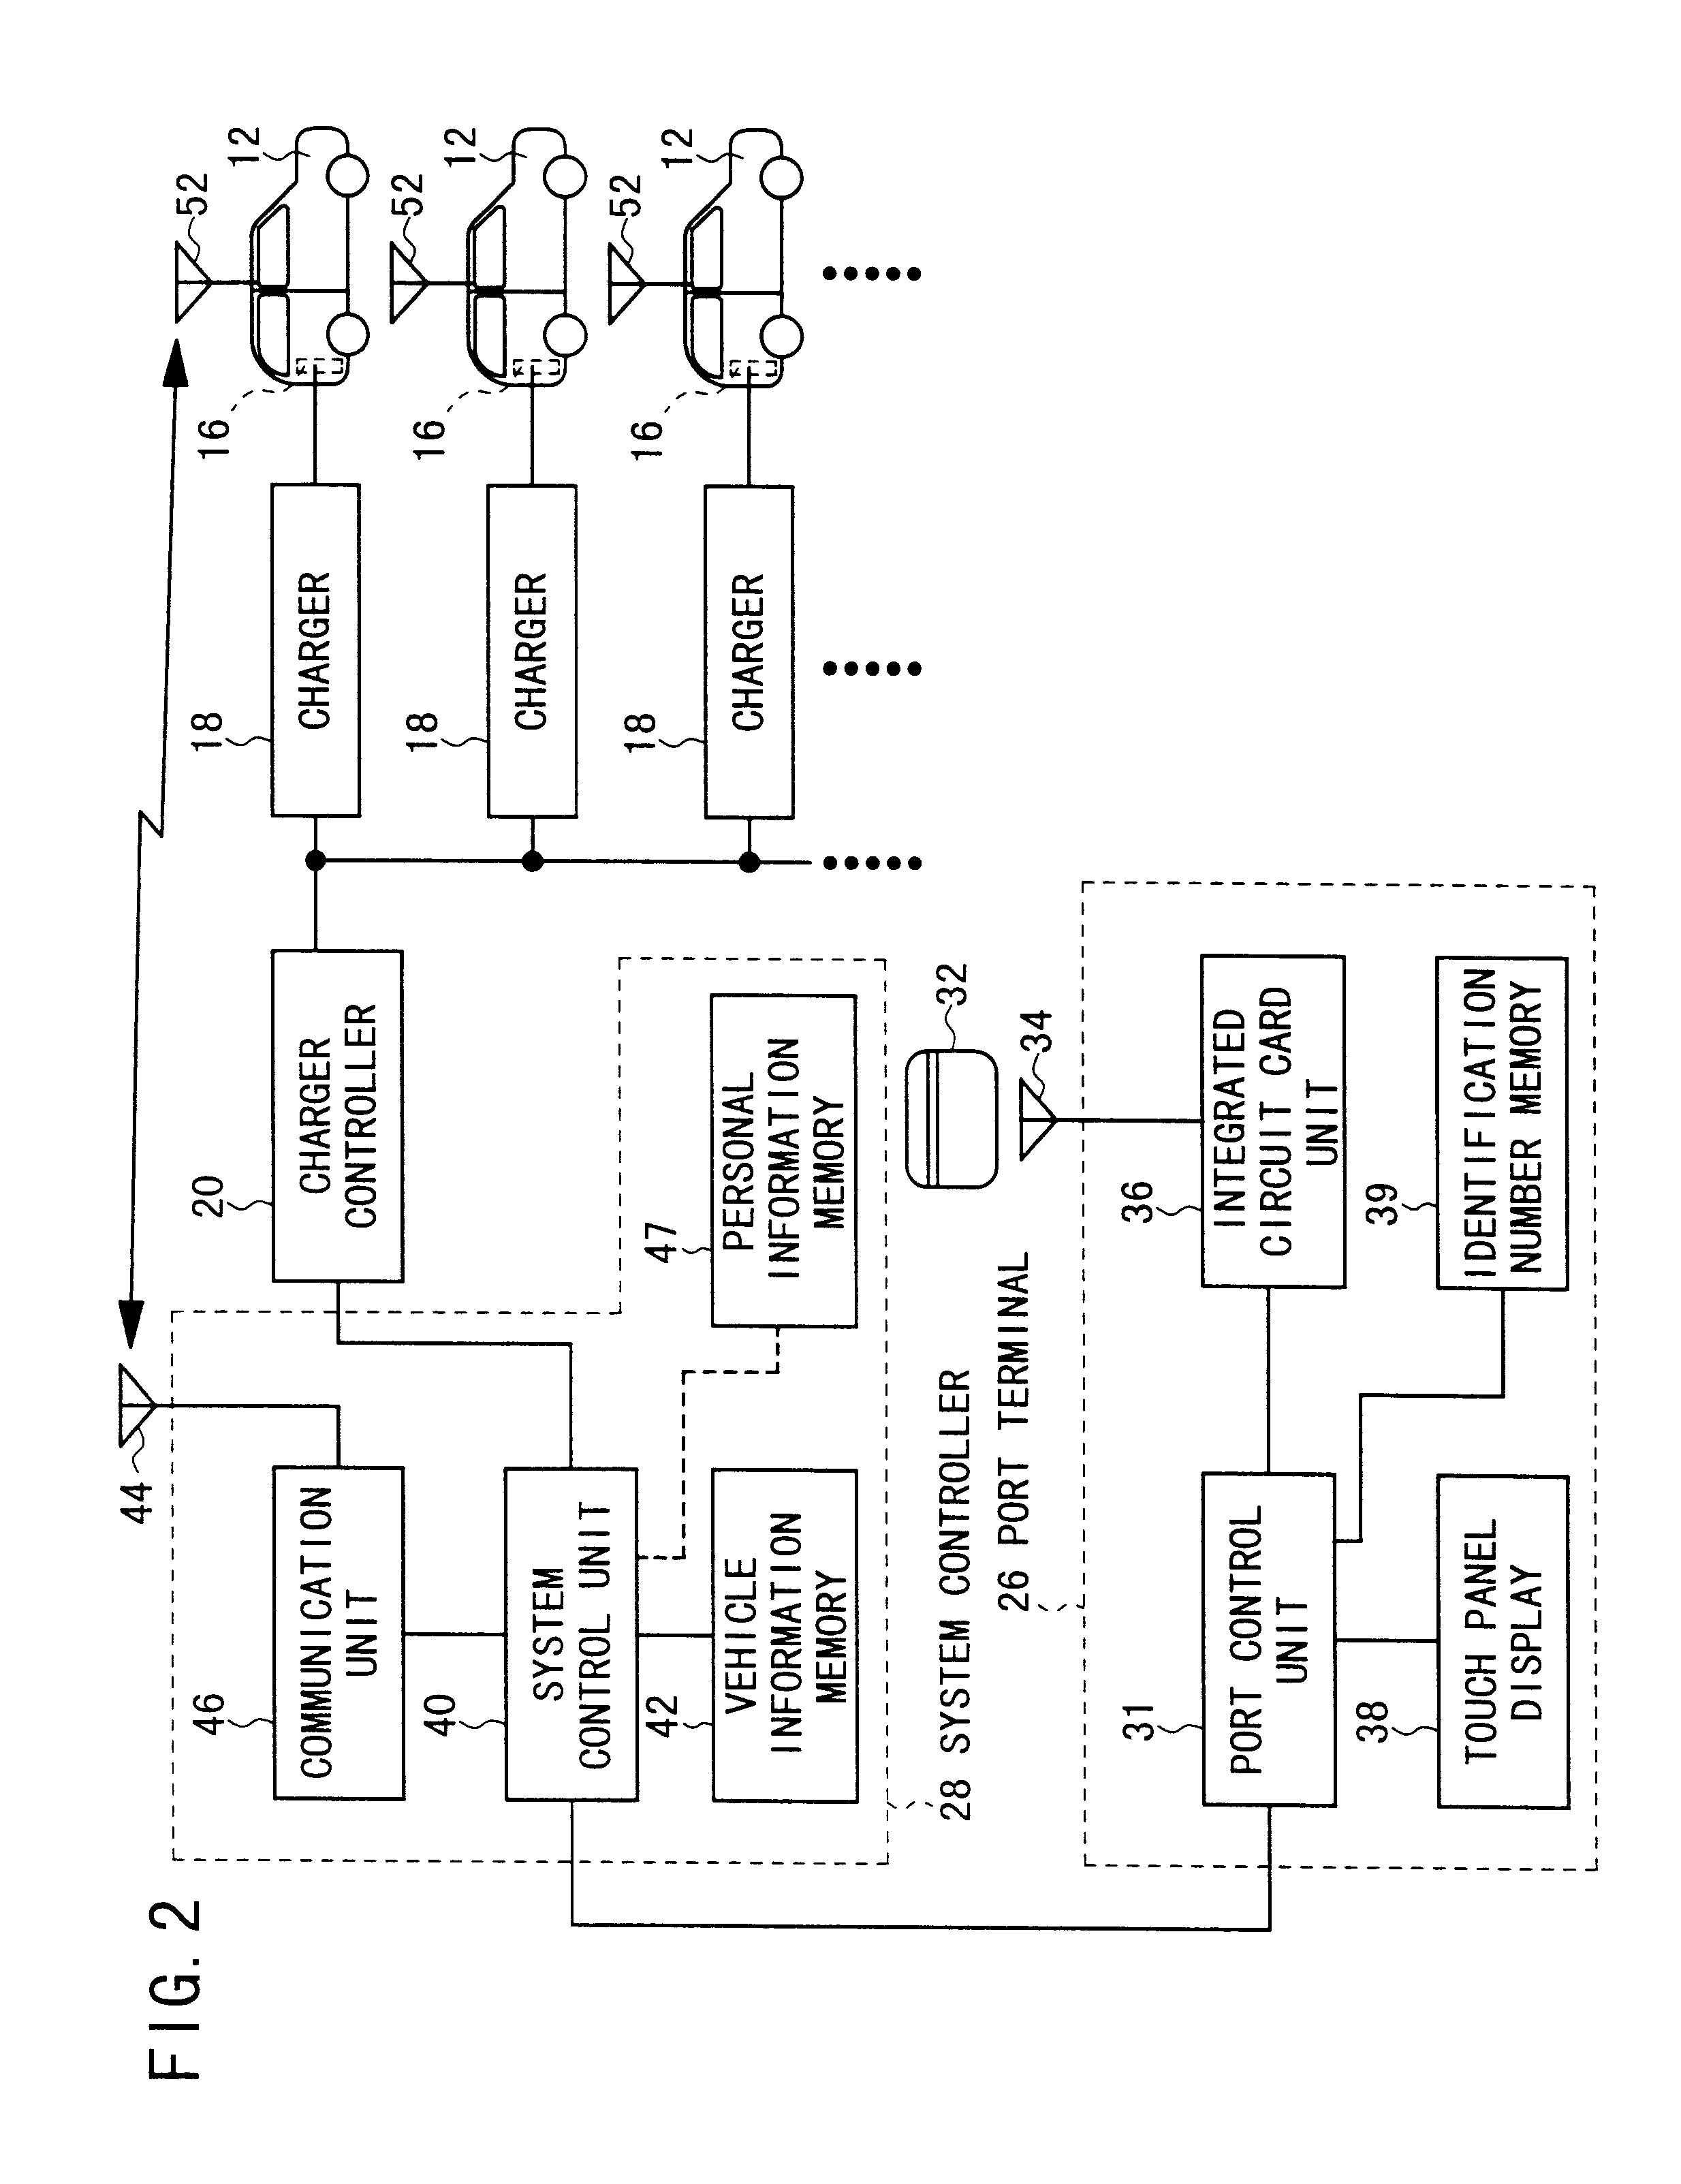 Electric vehicle sharing system